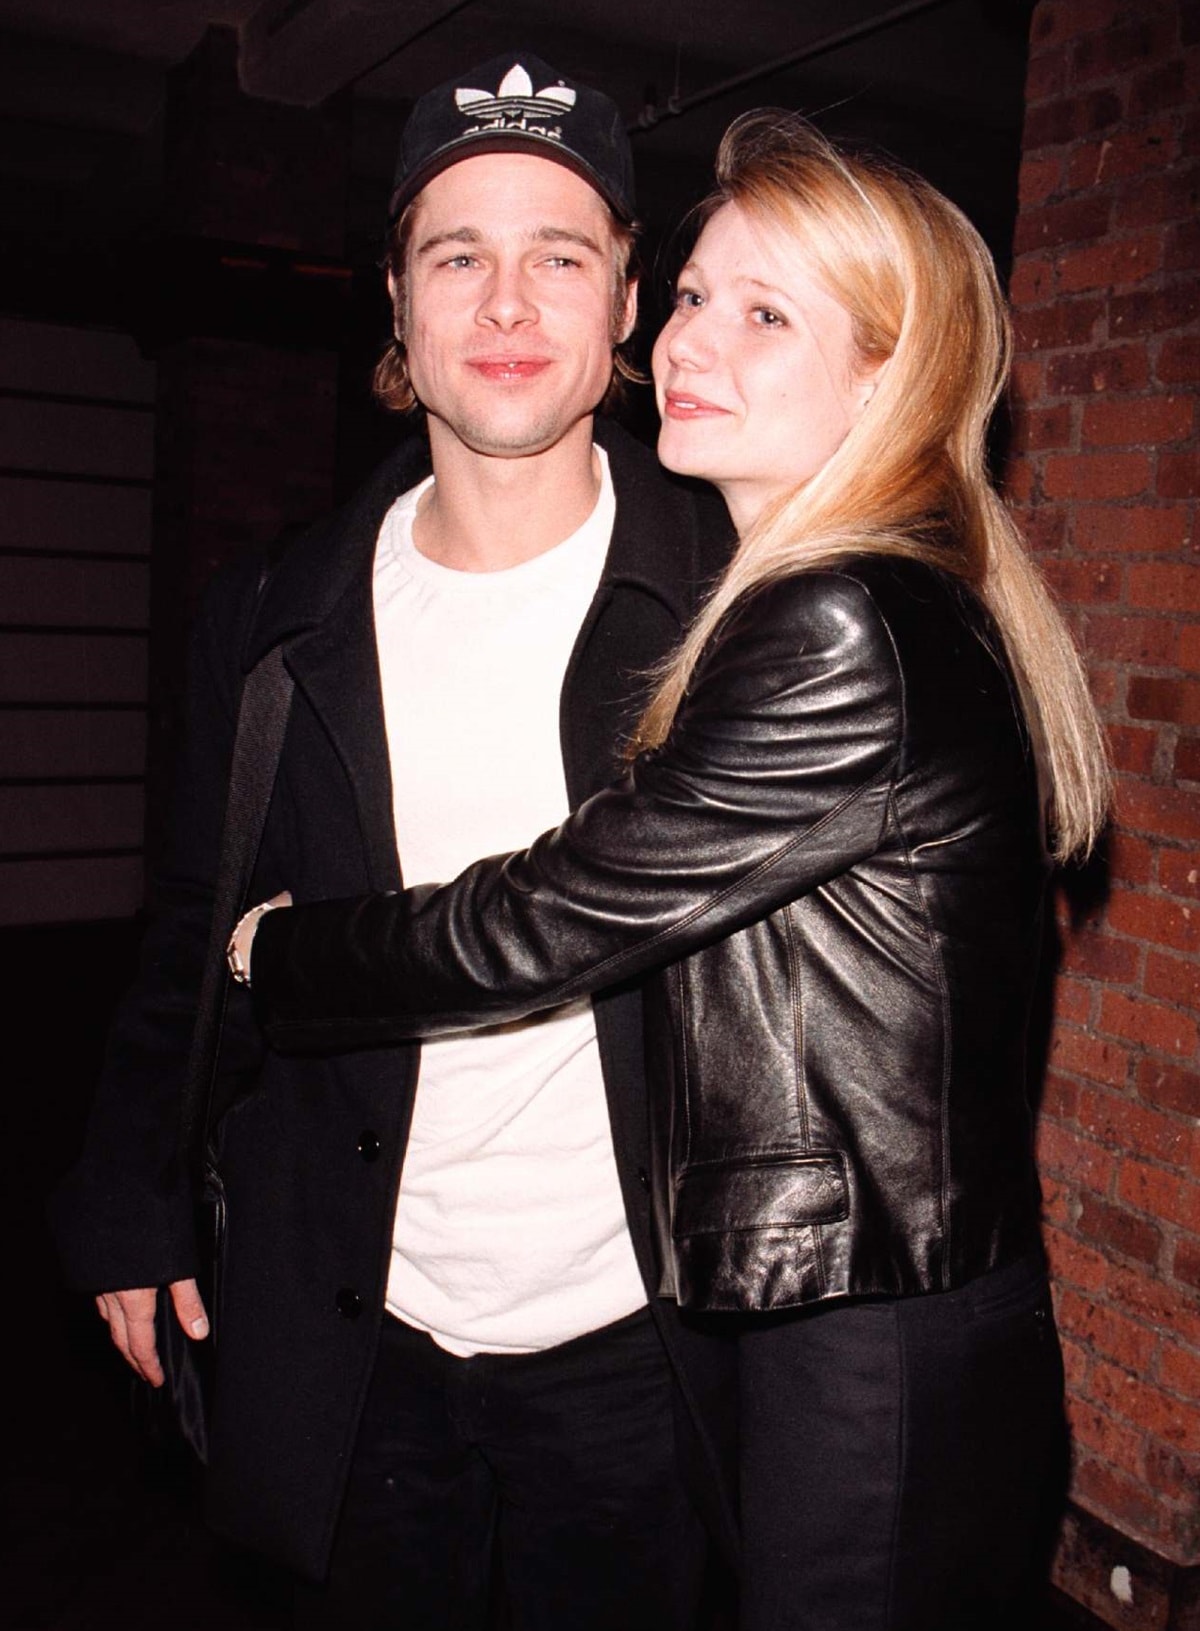 Gwyneth Paltrow and Brad Pitt met in 1994 on the set of the film Seven, began dating soon after, got engaged in 1996 and broke up in 1997